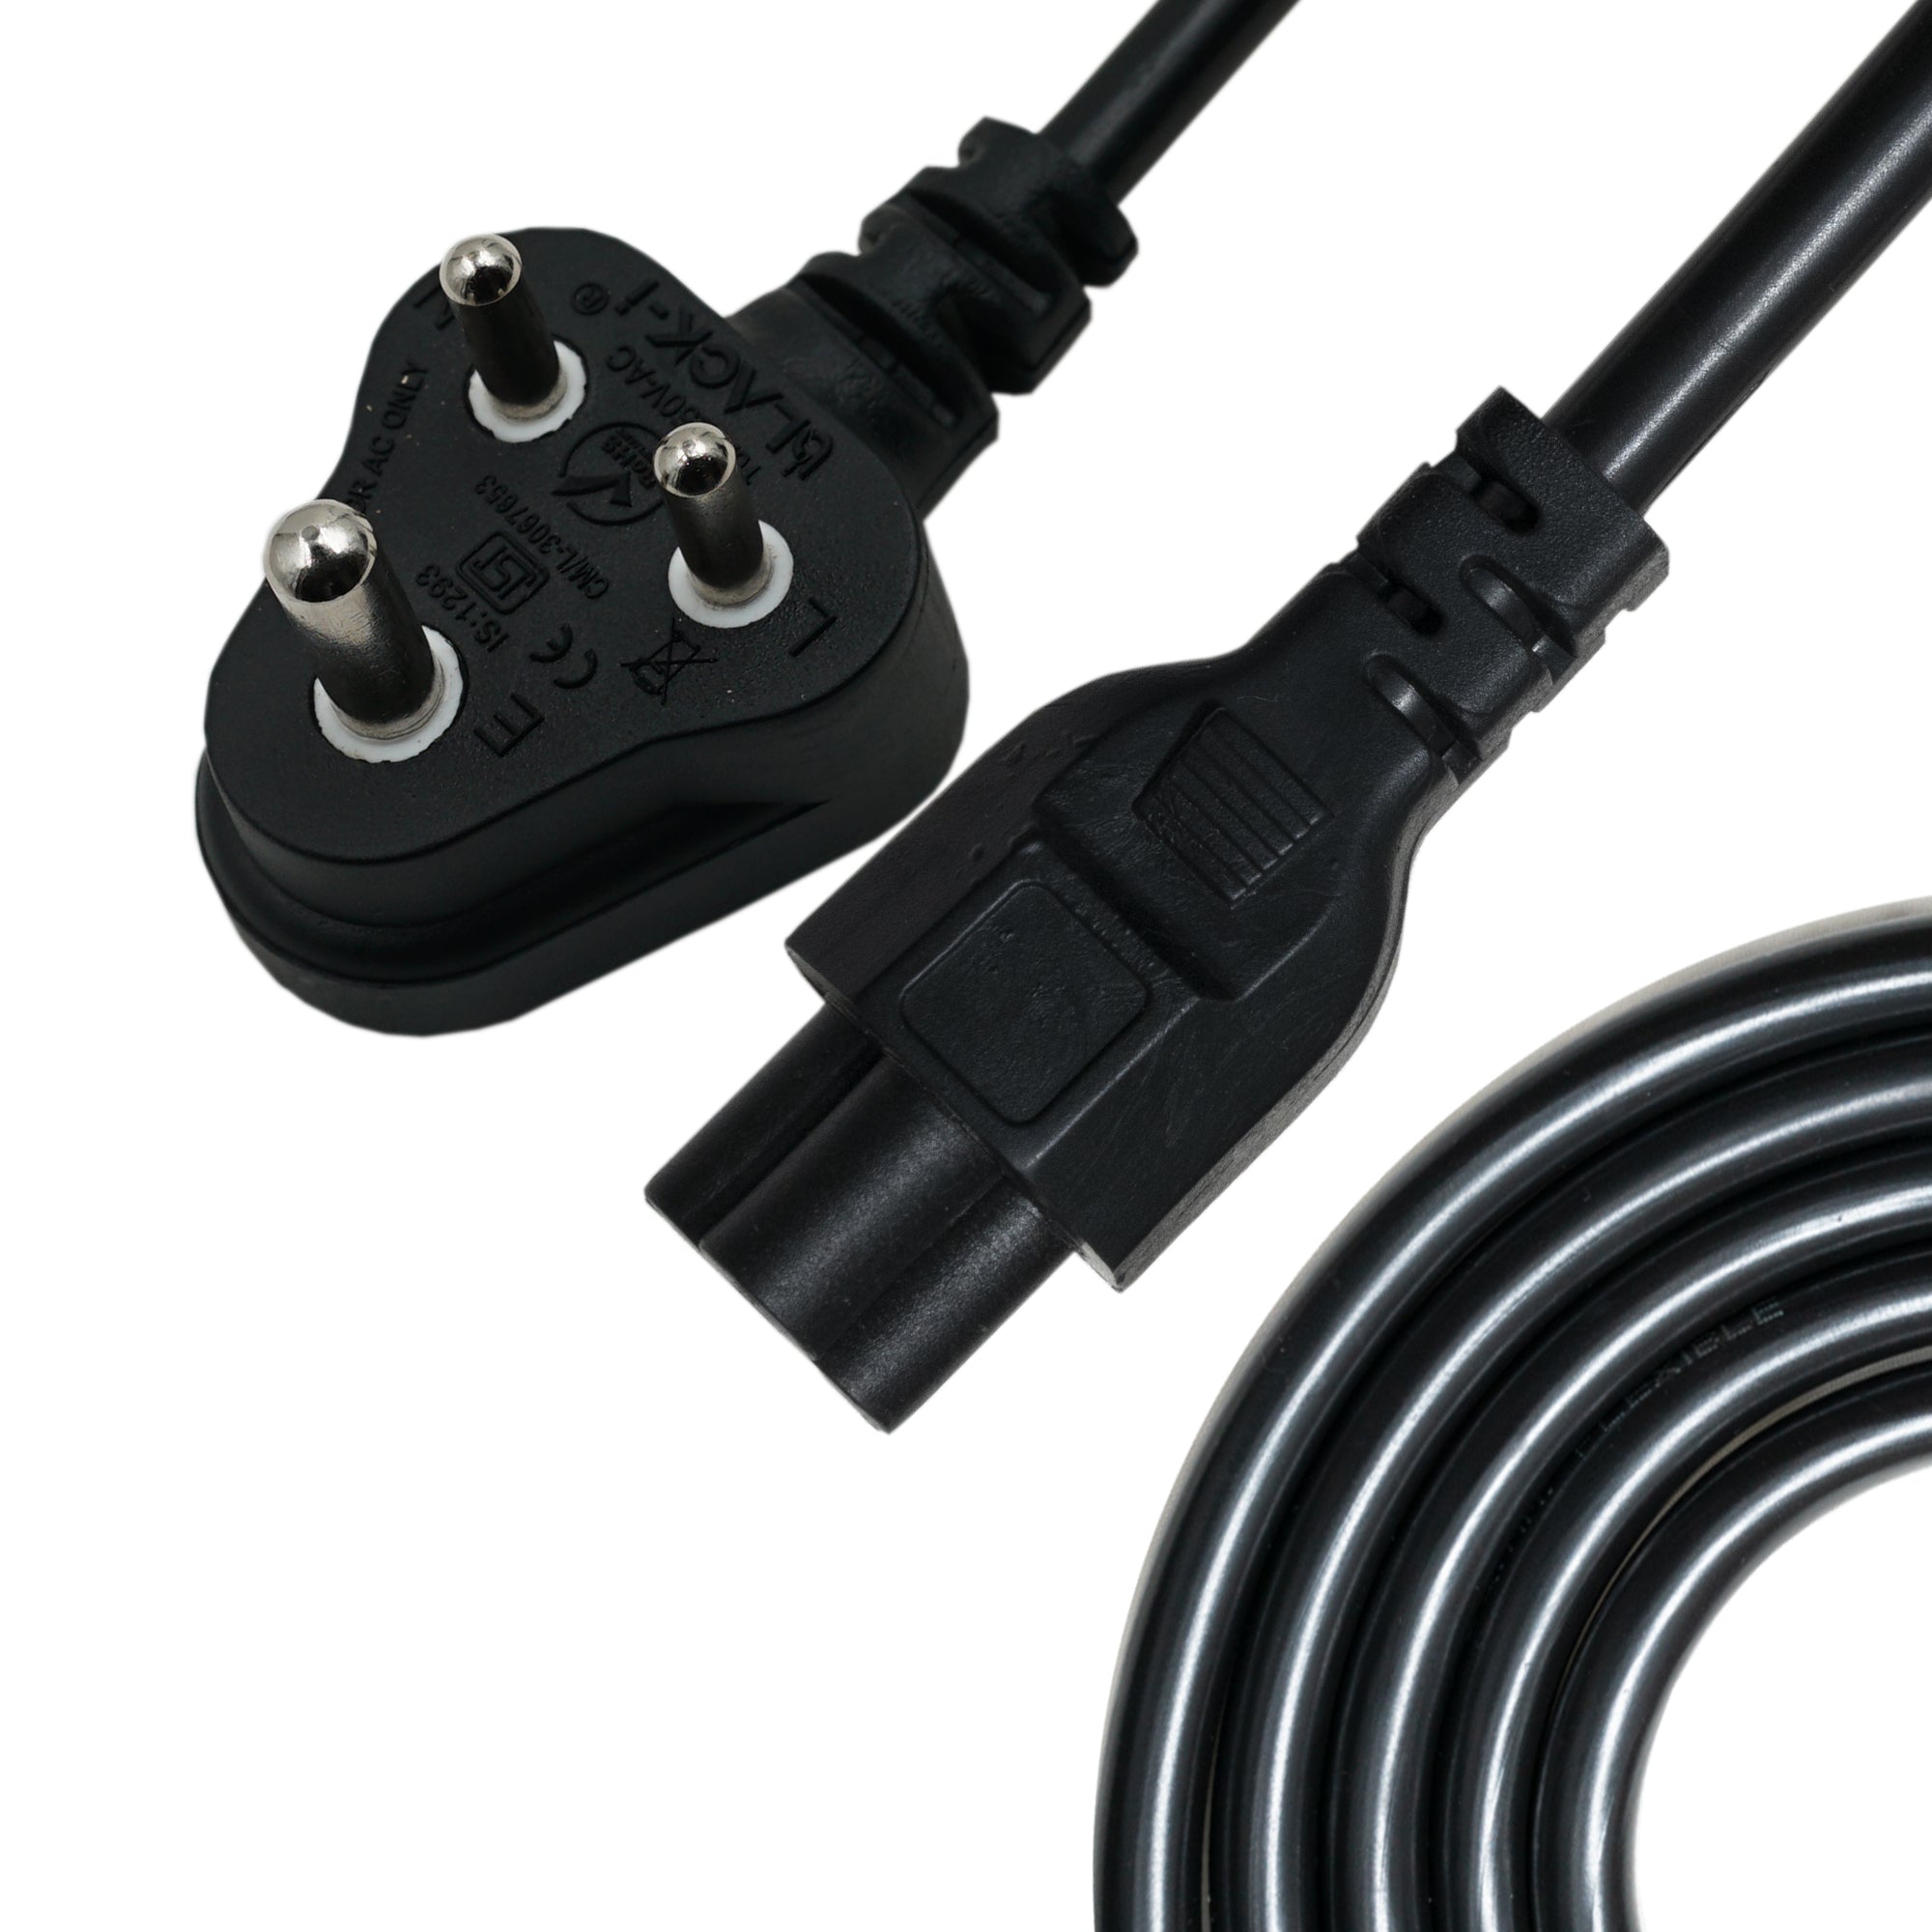 Black-i Laptop Power Cable 1.5 Meter